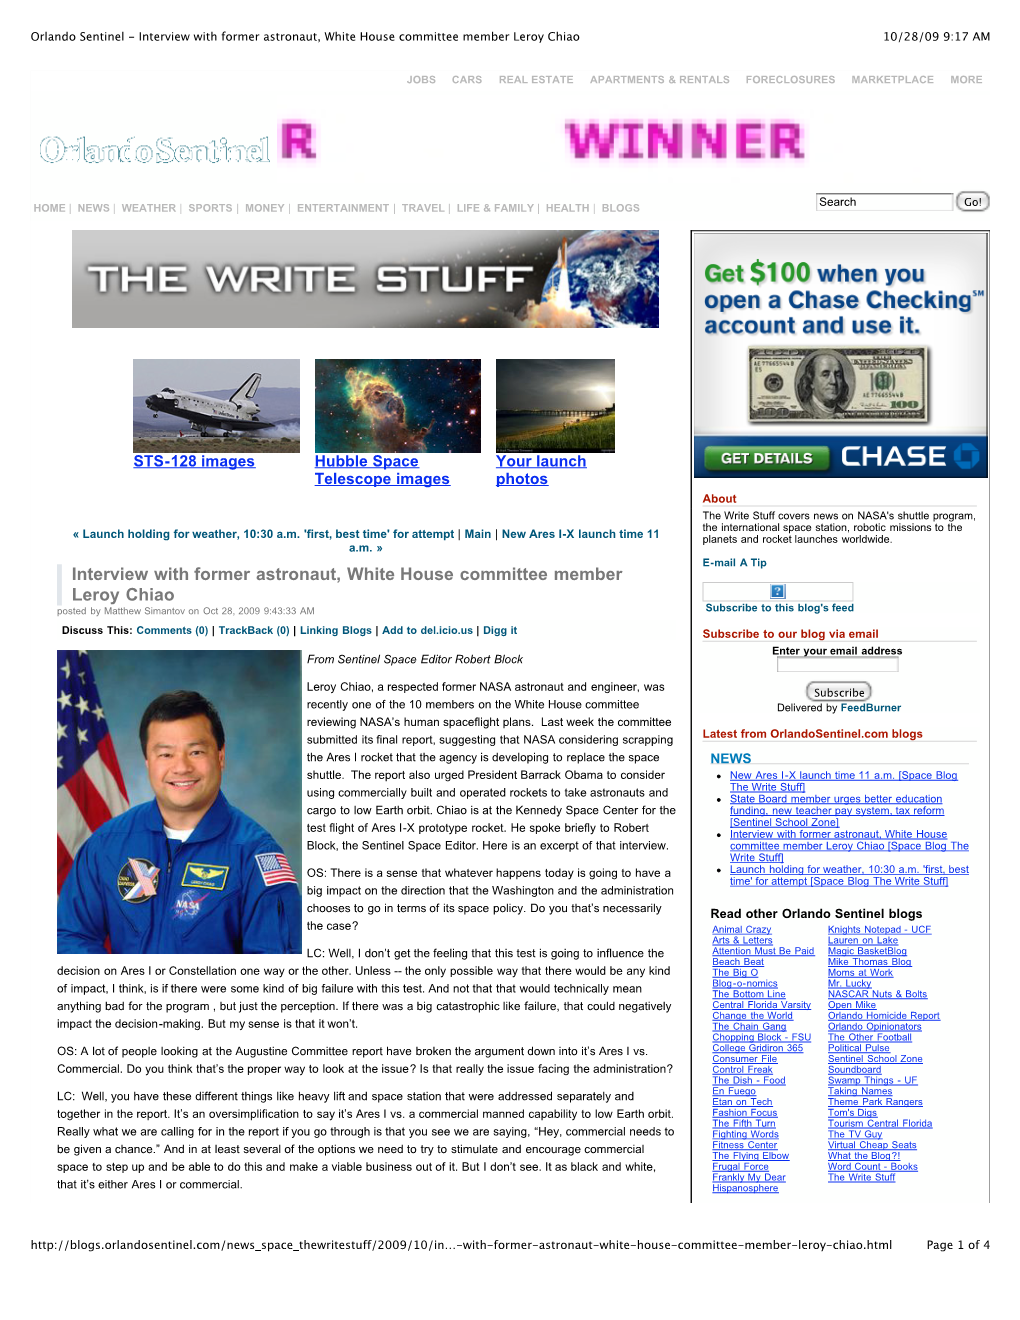 Orlando Sentinel - Interview with Former Astronaut, White House Committee Member Leroy Chiao 10/28/09 9:17 AM